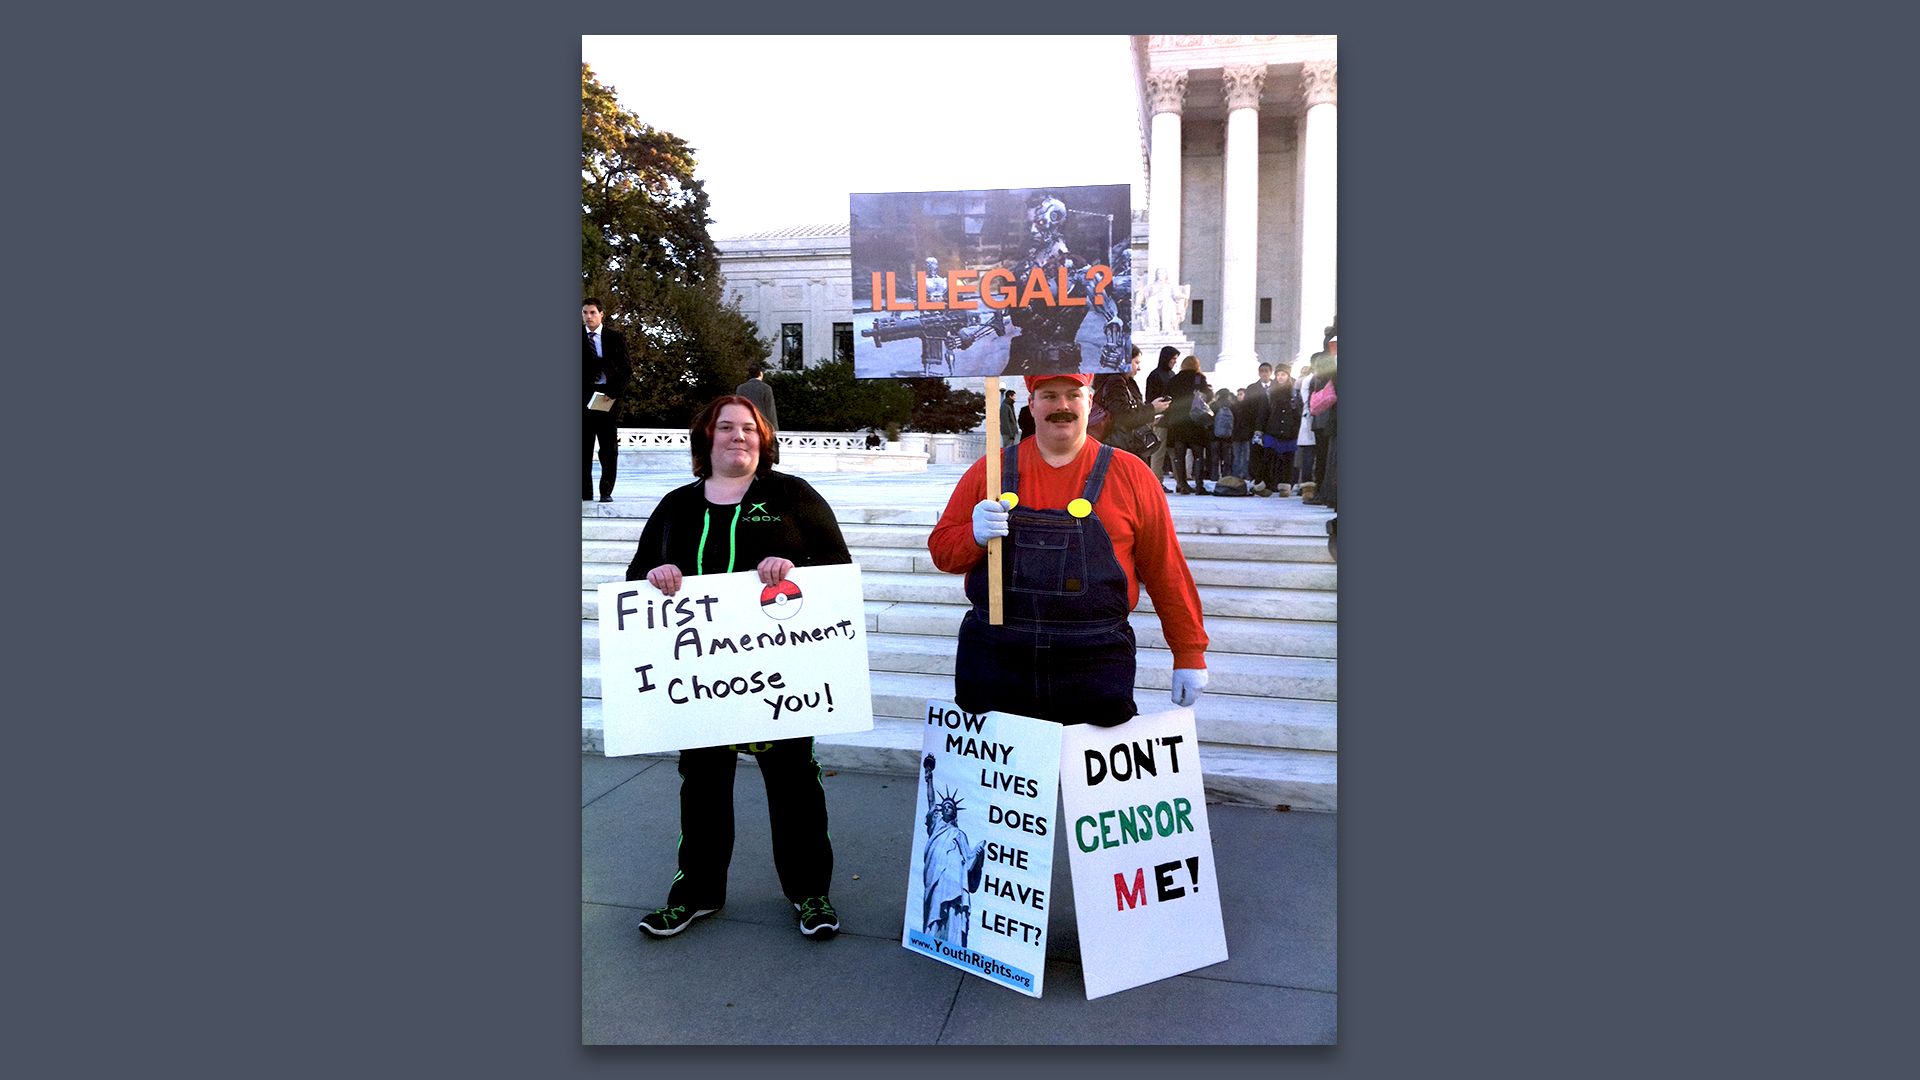 Photo of two protestors at the foot of the Supreme Court steps. One is wearing overalls and a red shirt. Another holds a sign that says: "First Amendment, I choose you."